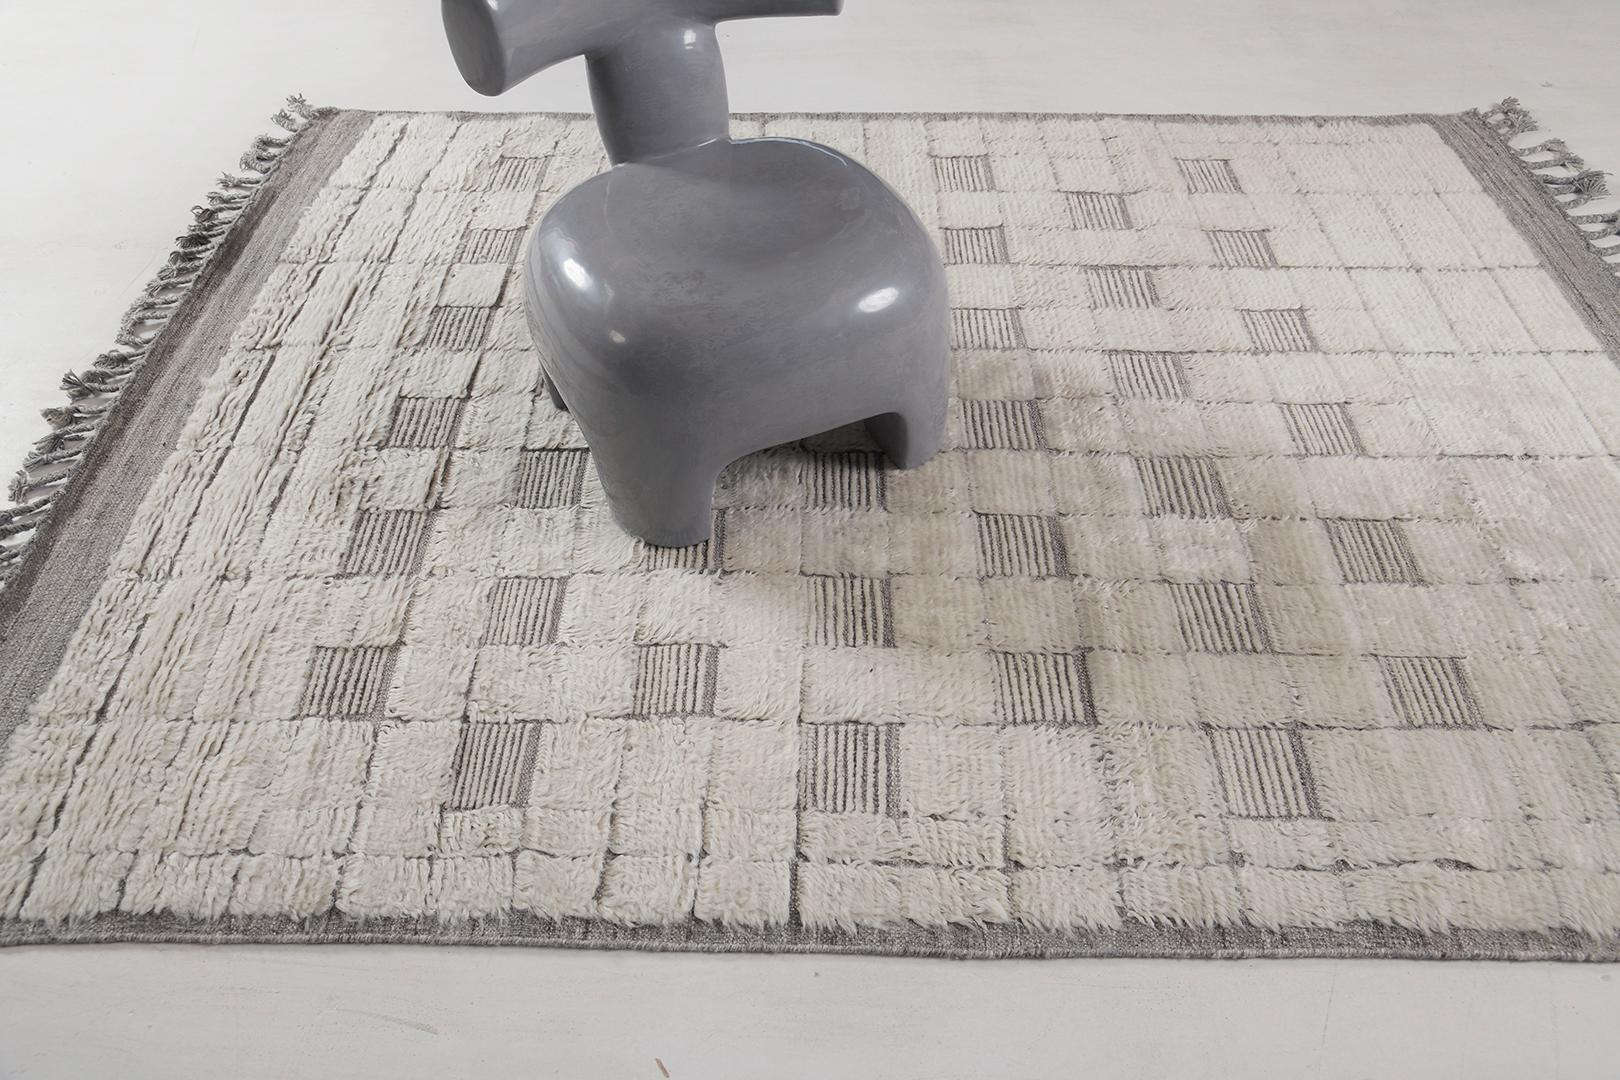 Heron is luxurious wool that features an embossed natural and contemporary design that gives your home a modern elegance. The soothing plush pile of this masterpiece makes you satisfied in every stay. Sandpiper collection designed in Los Angeles has